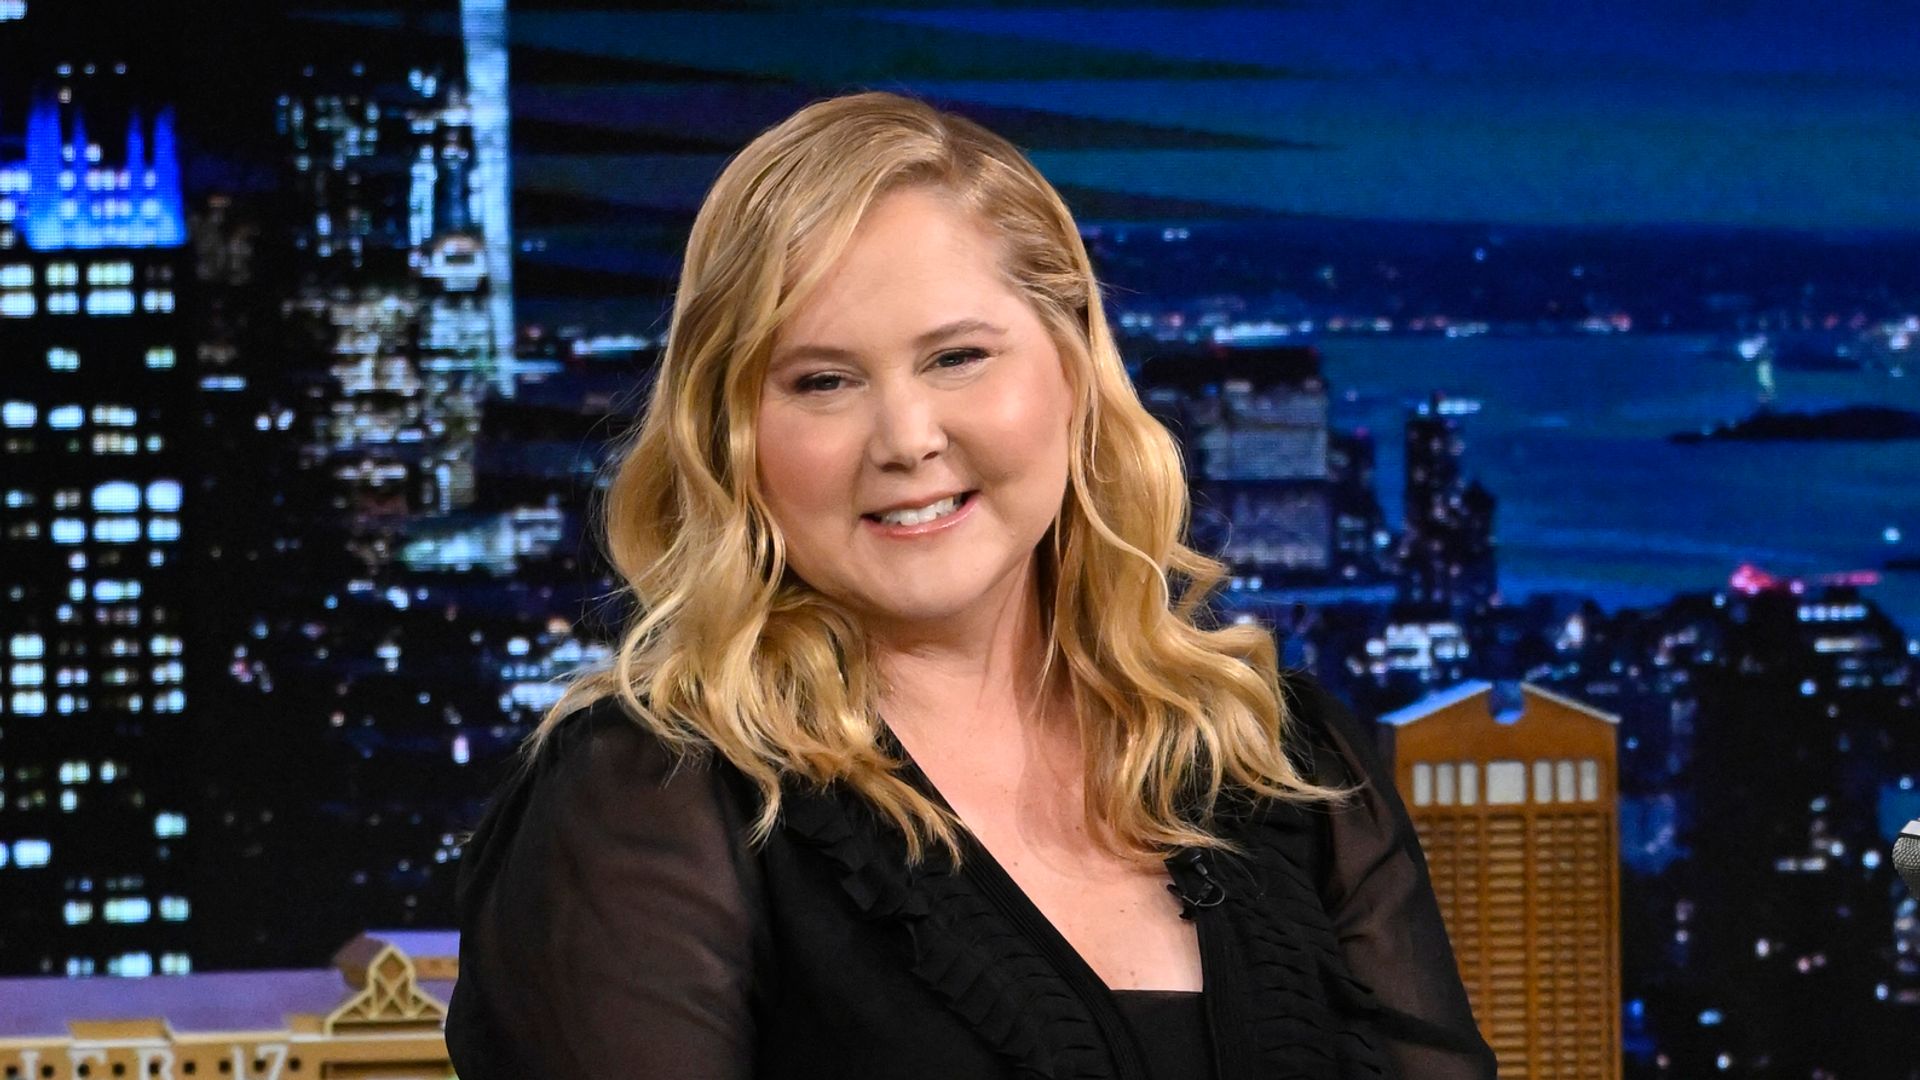 Comedian & actress Amy Schumer during an interview on The Tonight Show Starring Jimmy Fallon